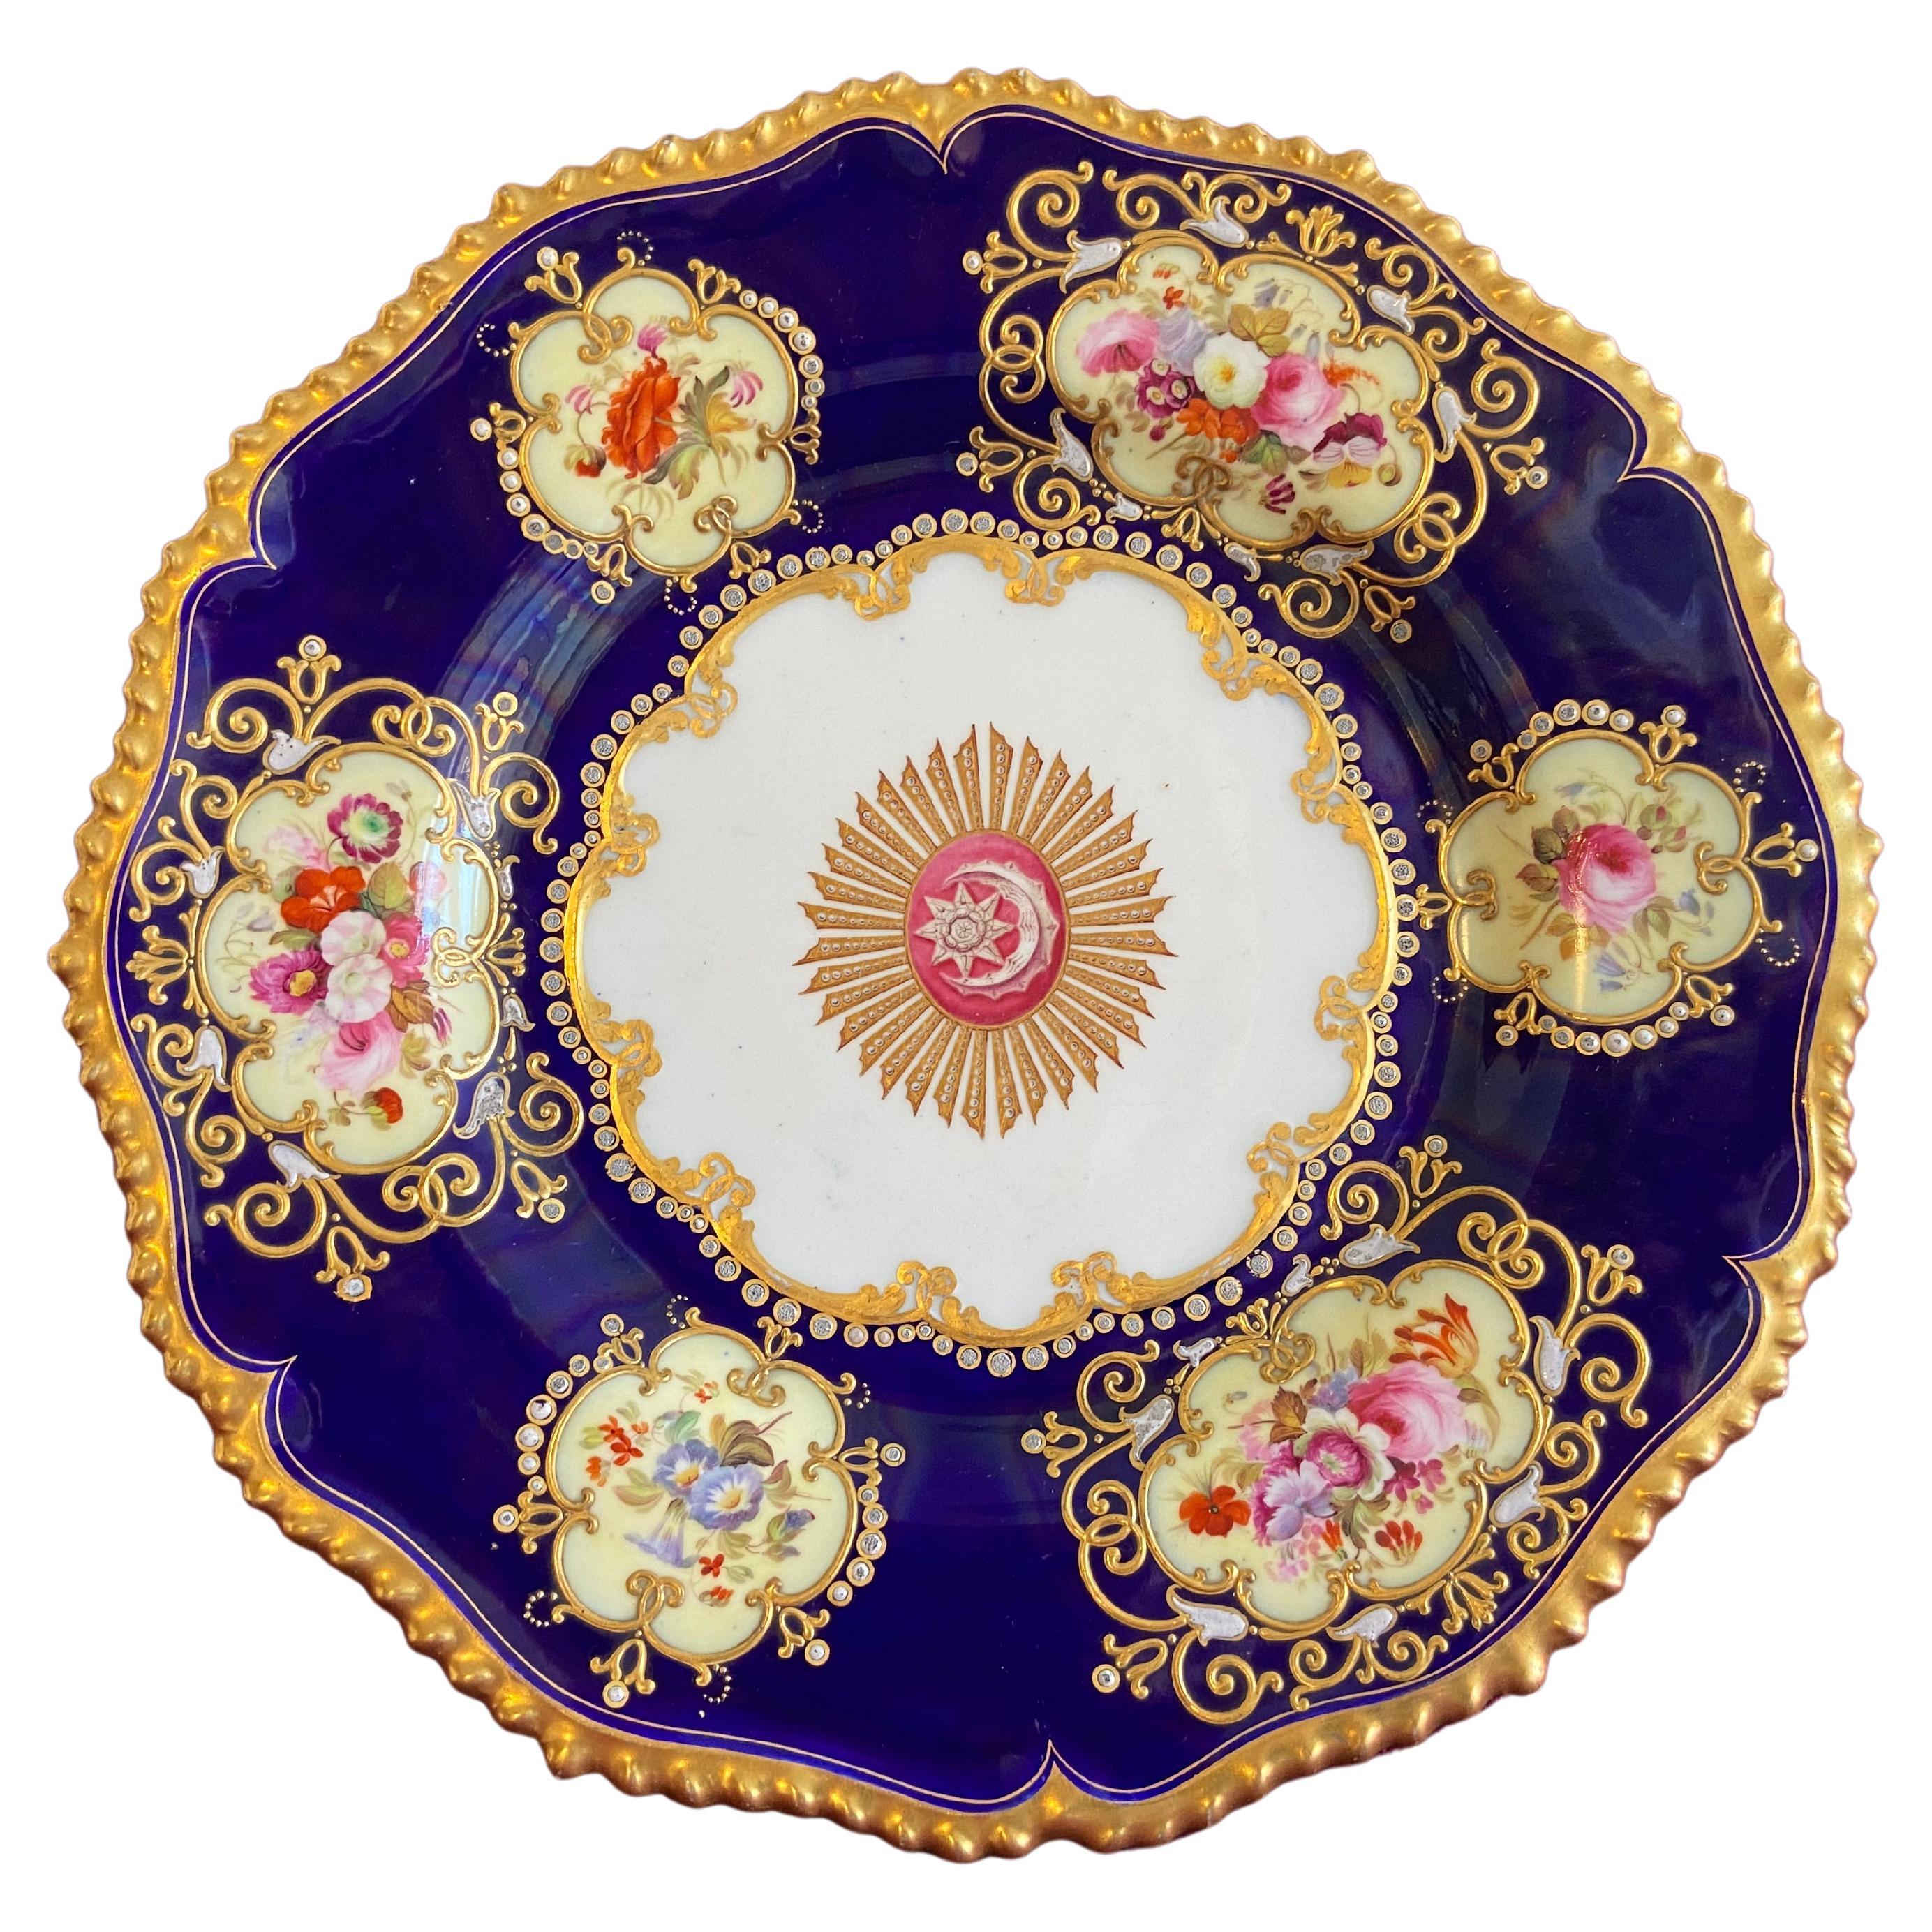 A rare Chamberlain Worcester porcelain Sultan's Plate c.1835